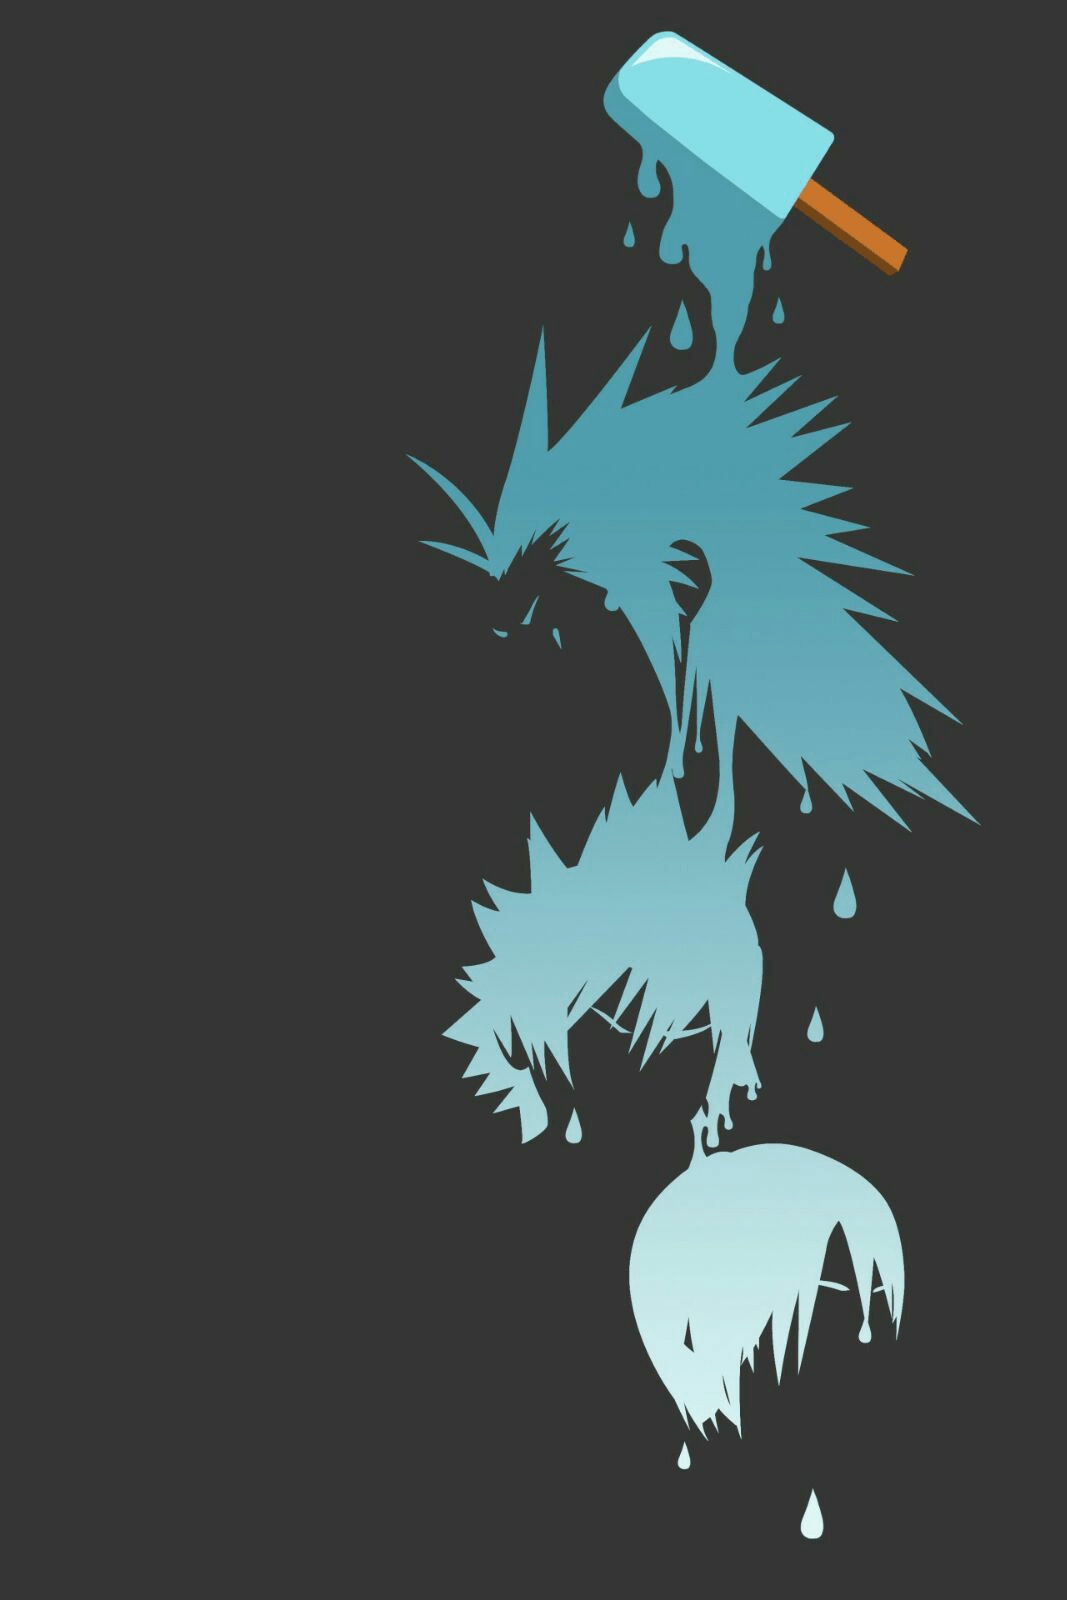 Kingdom Hearts Phone Wallpapers Top Free Kingdom Hearts Phone Backgrounds Wallpaperaccess